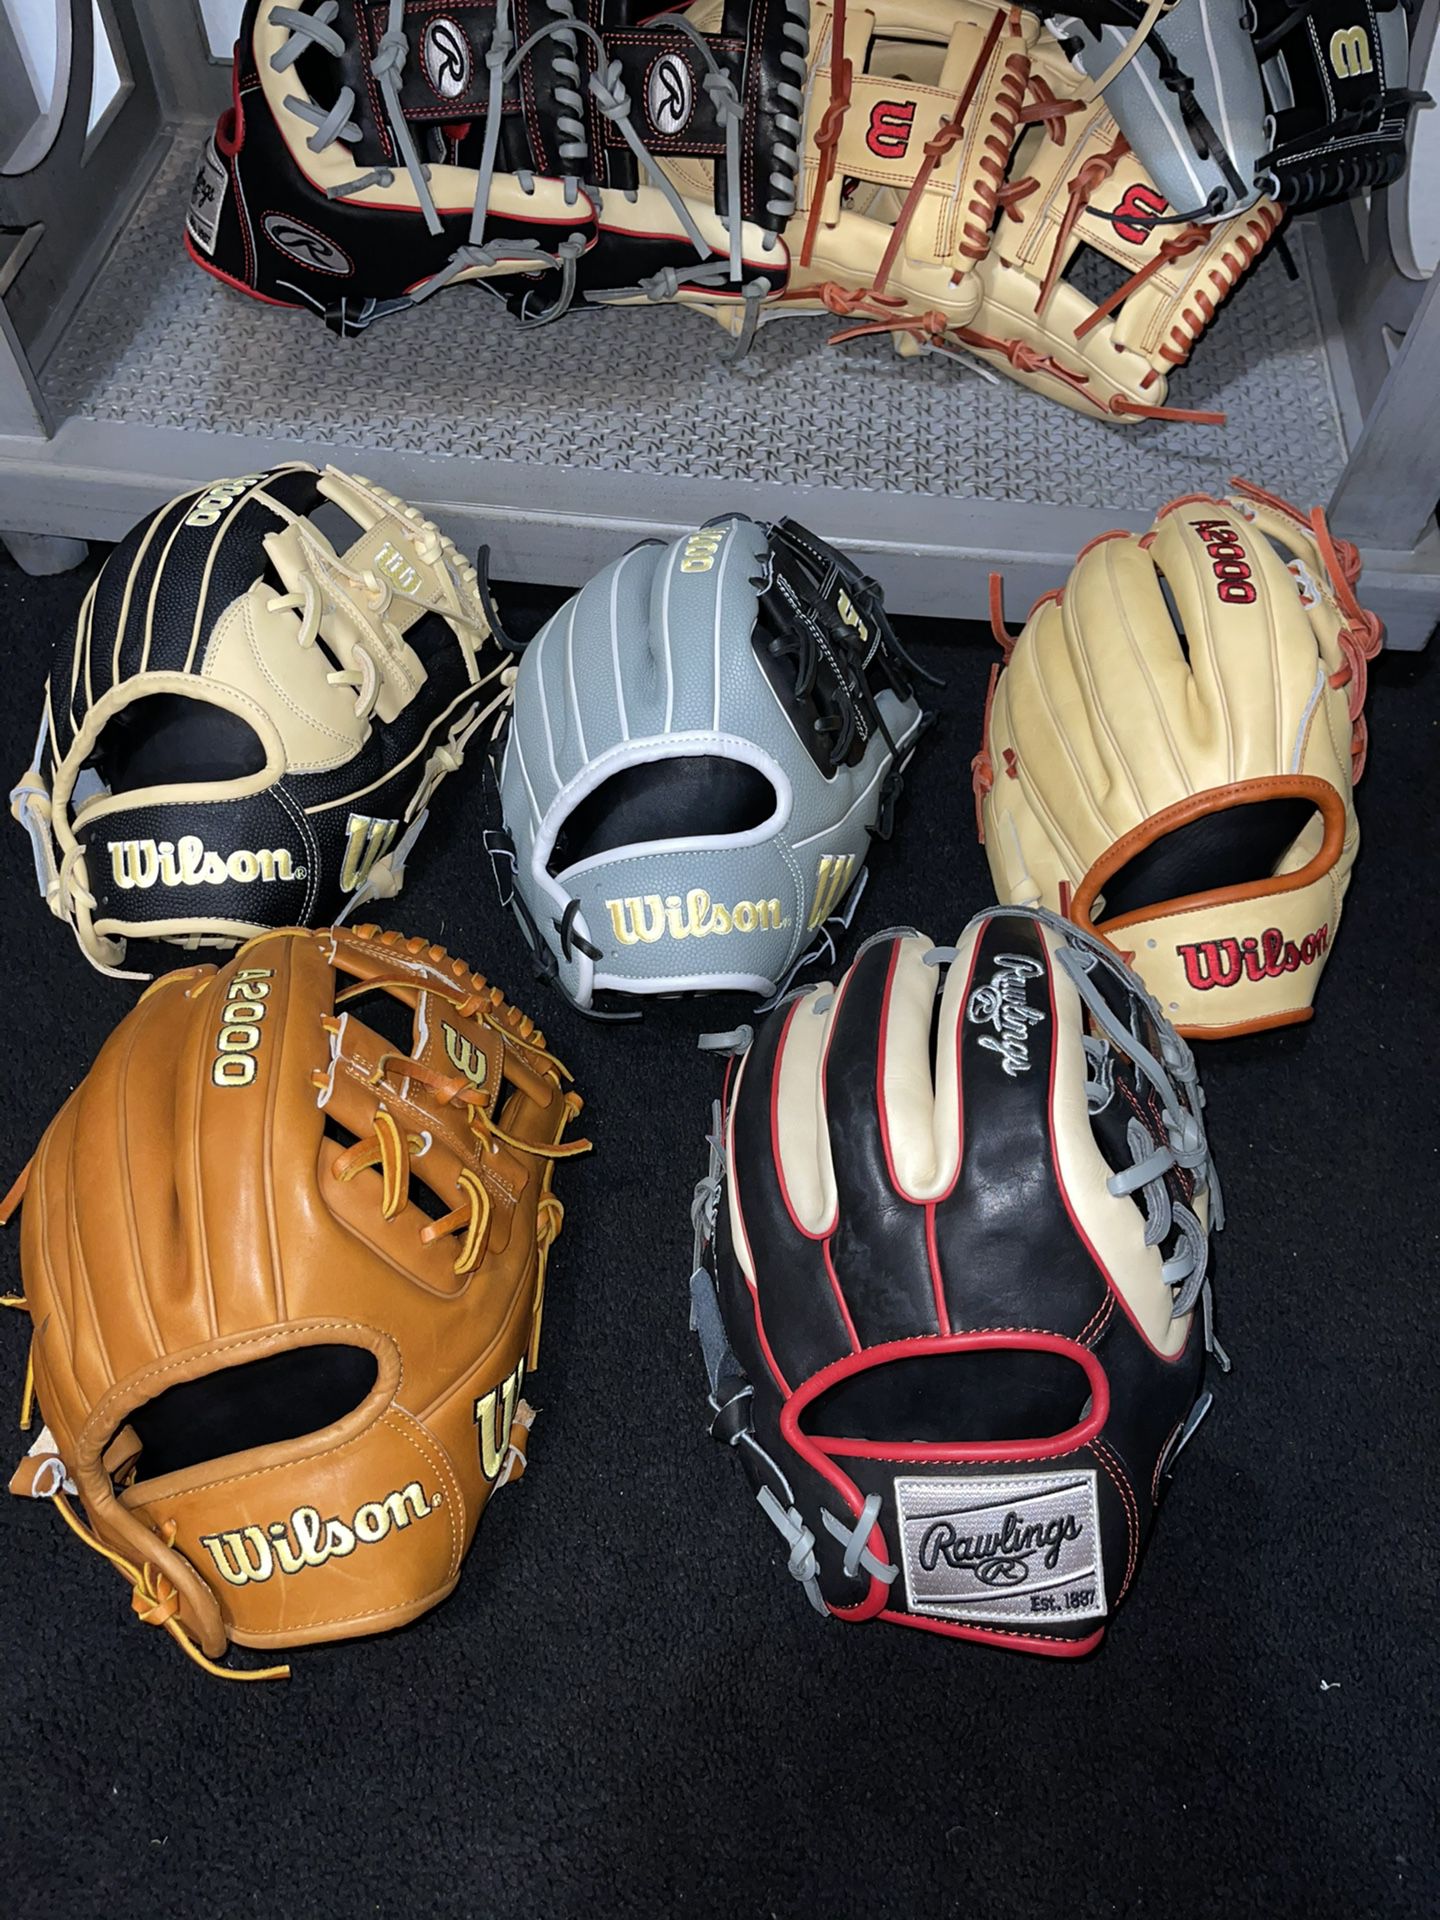 New Gloves Wilsons A 2000  And Rawlings Pro